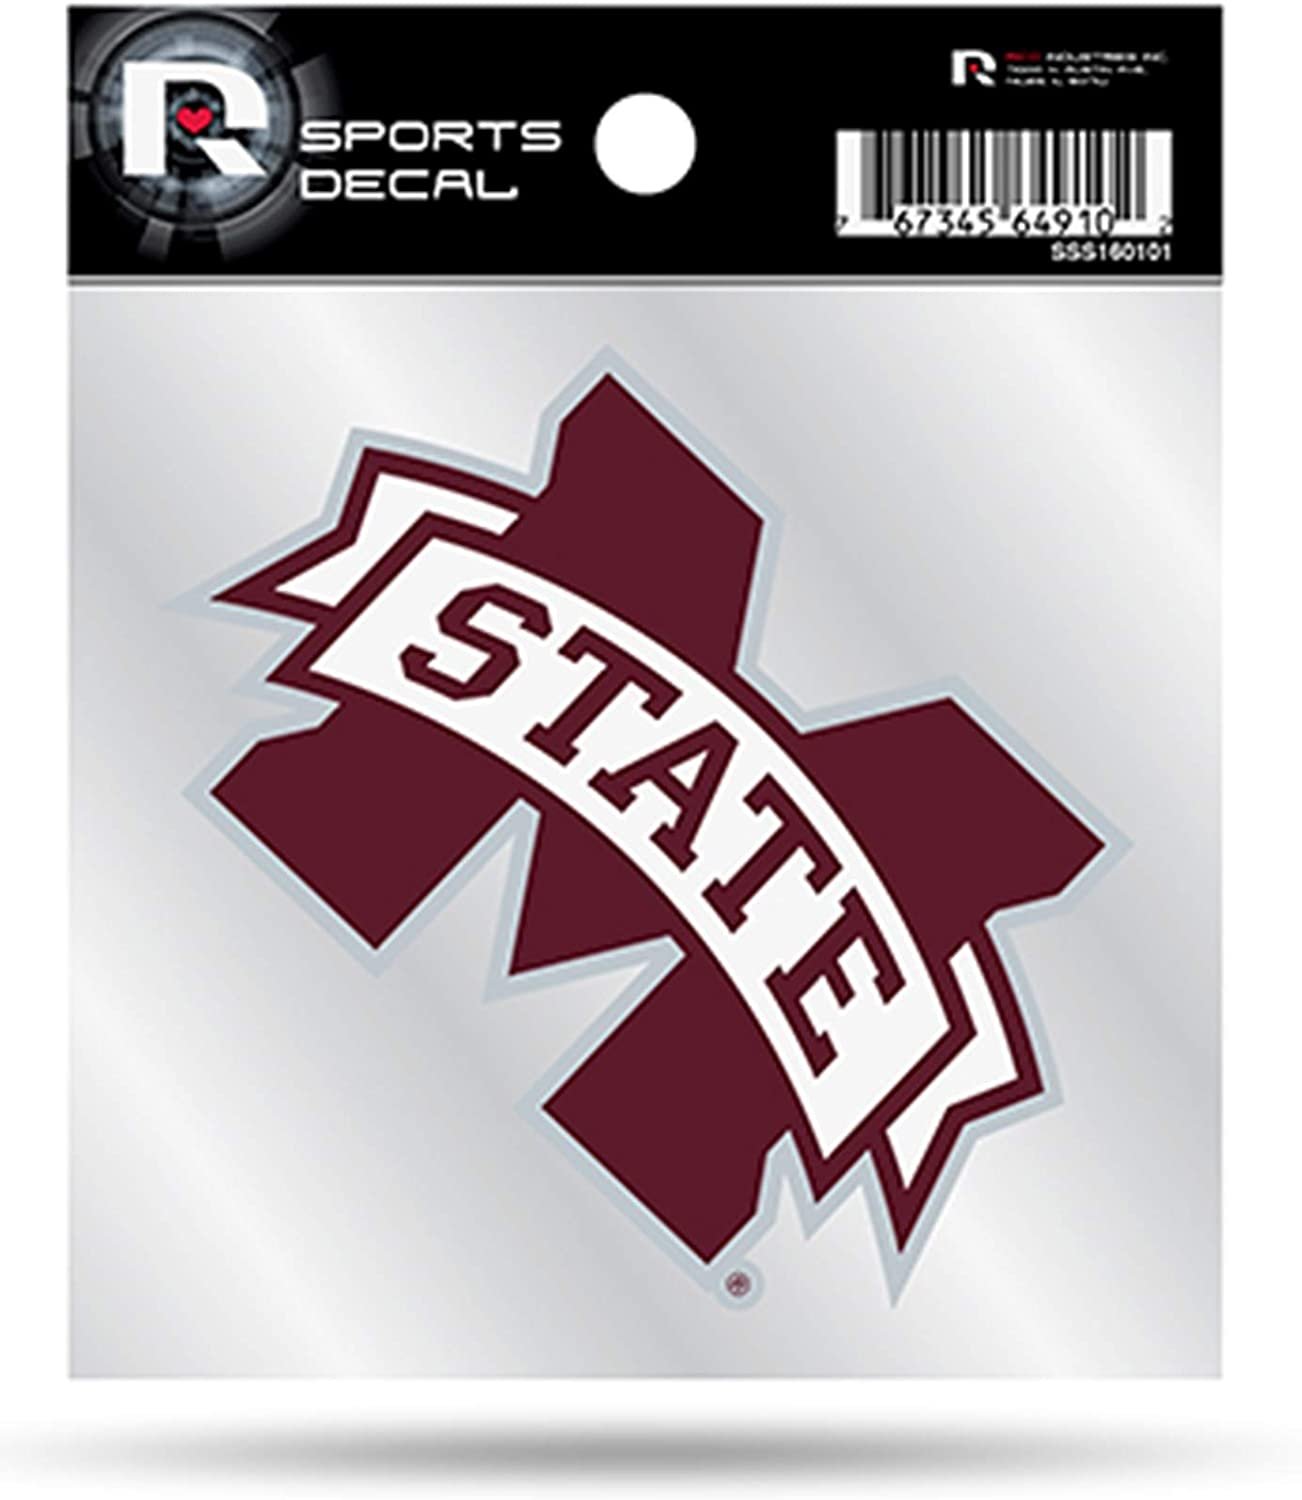 Mississippi State Bulldogs Premium 4x4 Decal with Clear Backing Flat Vinyl Auto Home Sticker University of